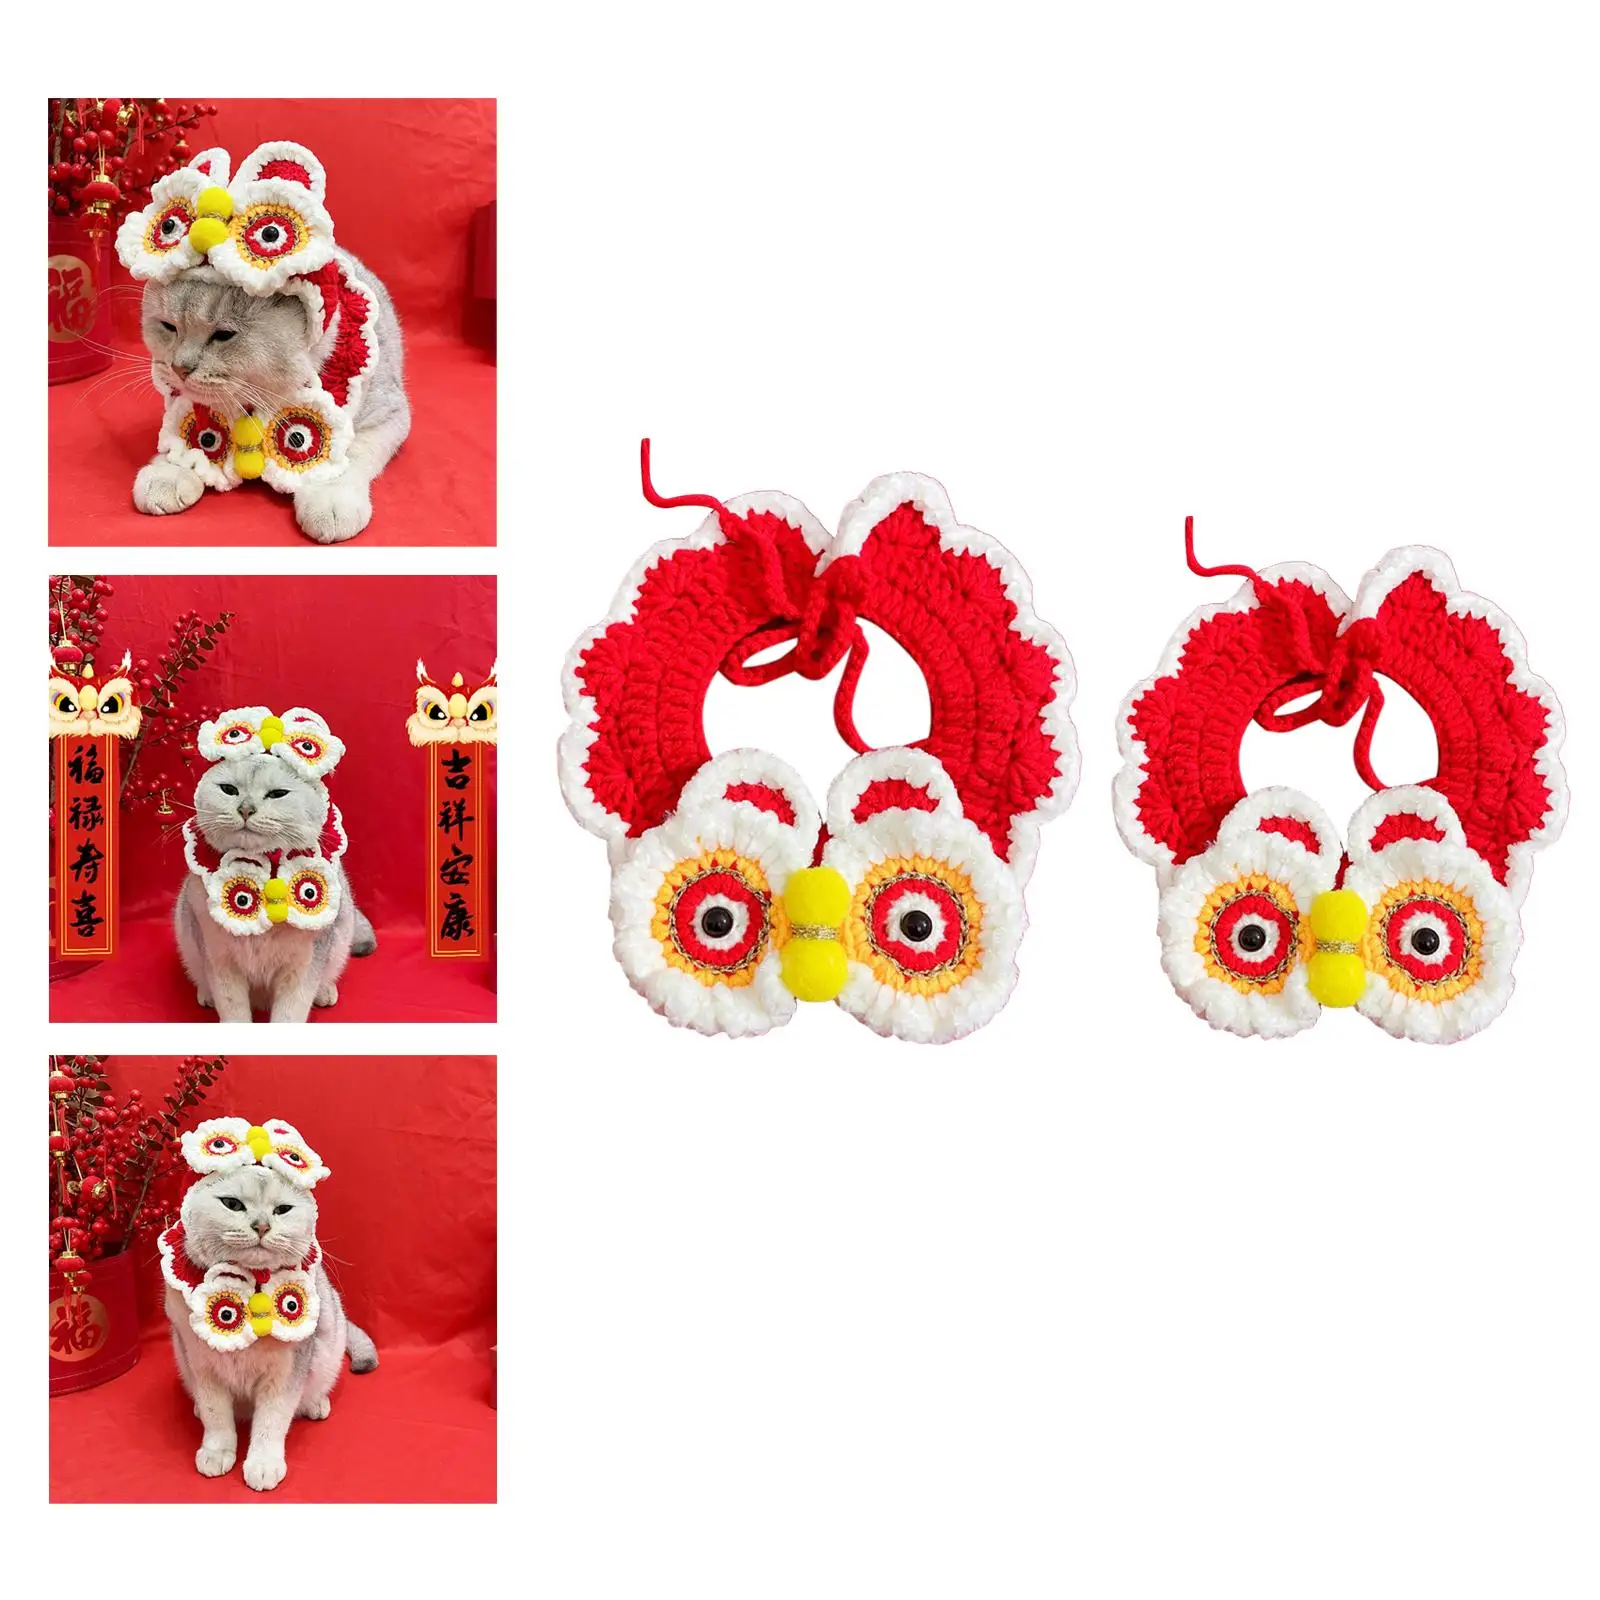 Chinese New Year Pet Scarf Accessories Photo Props Decorative Knit for Dogs